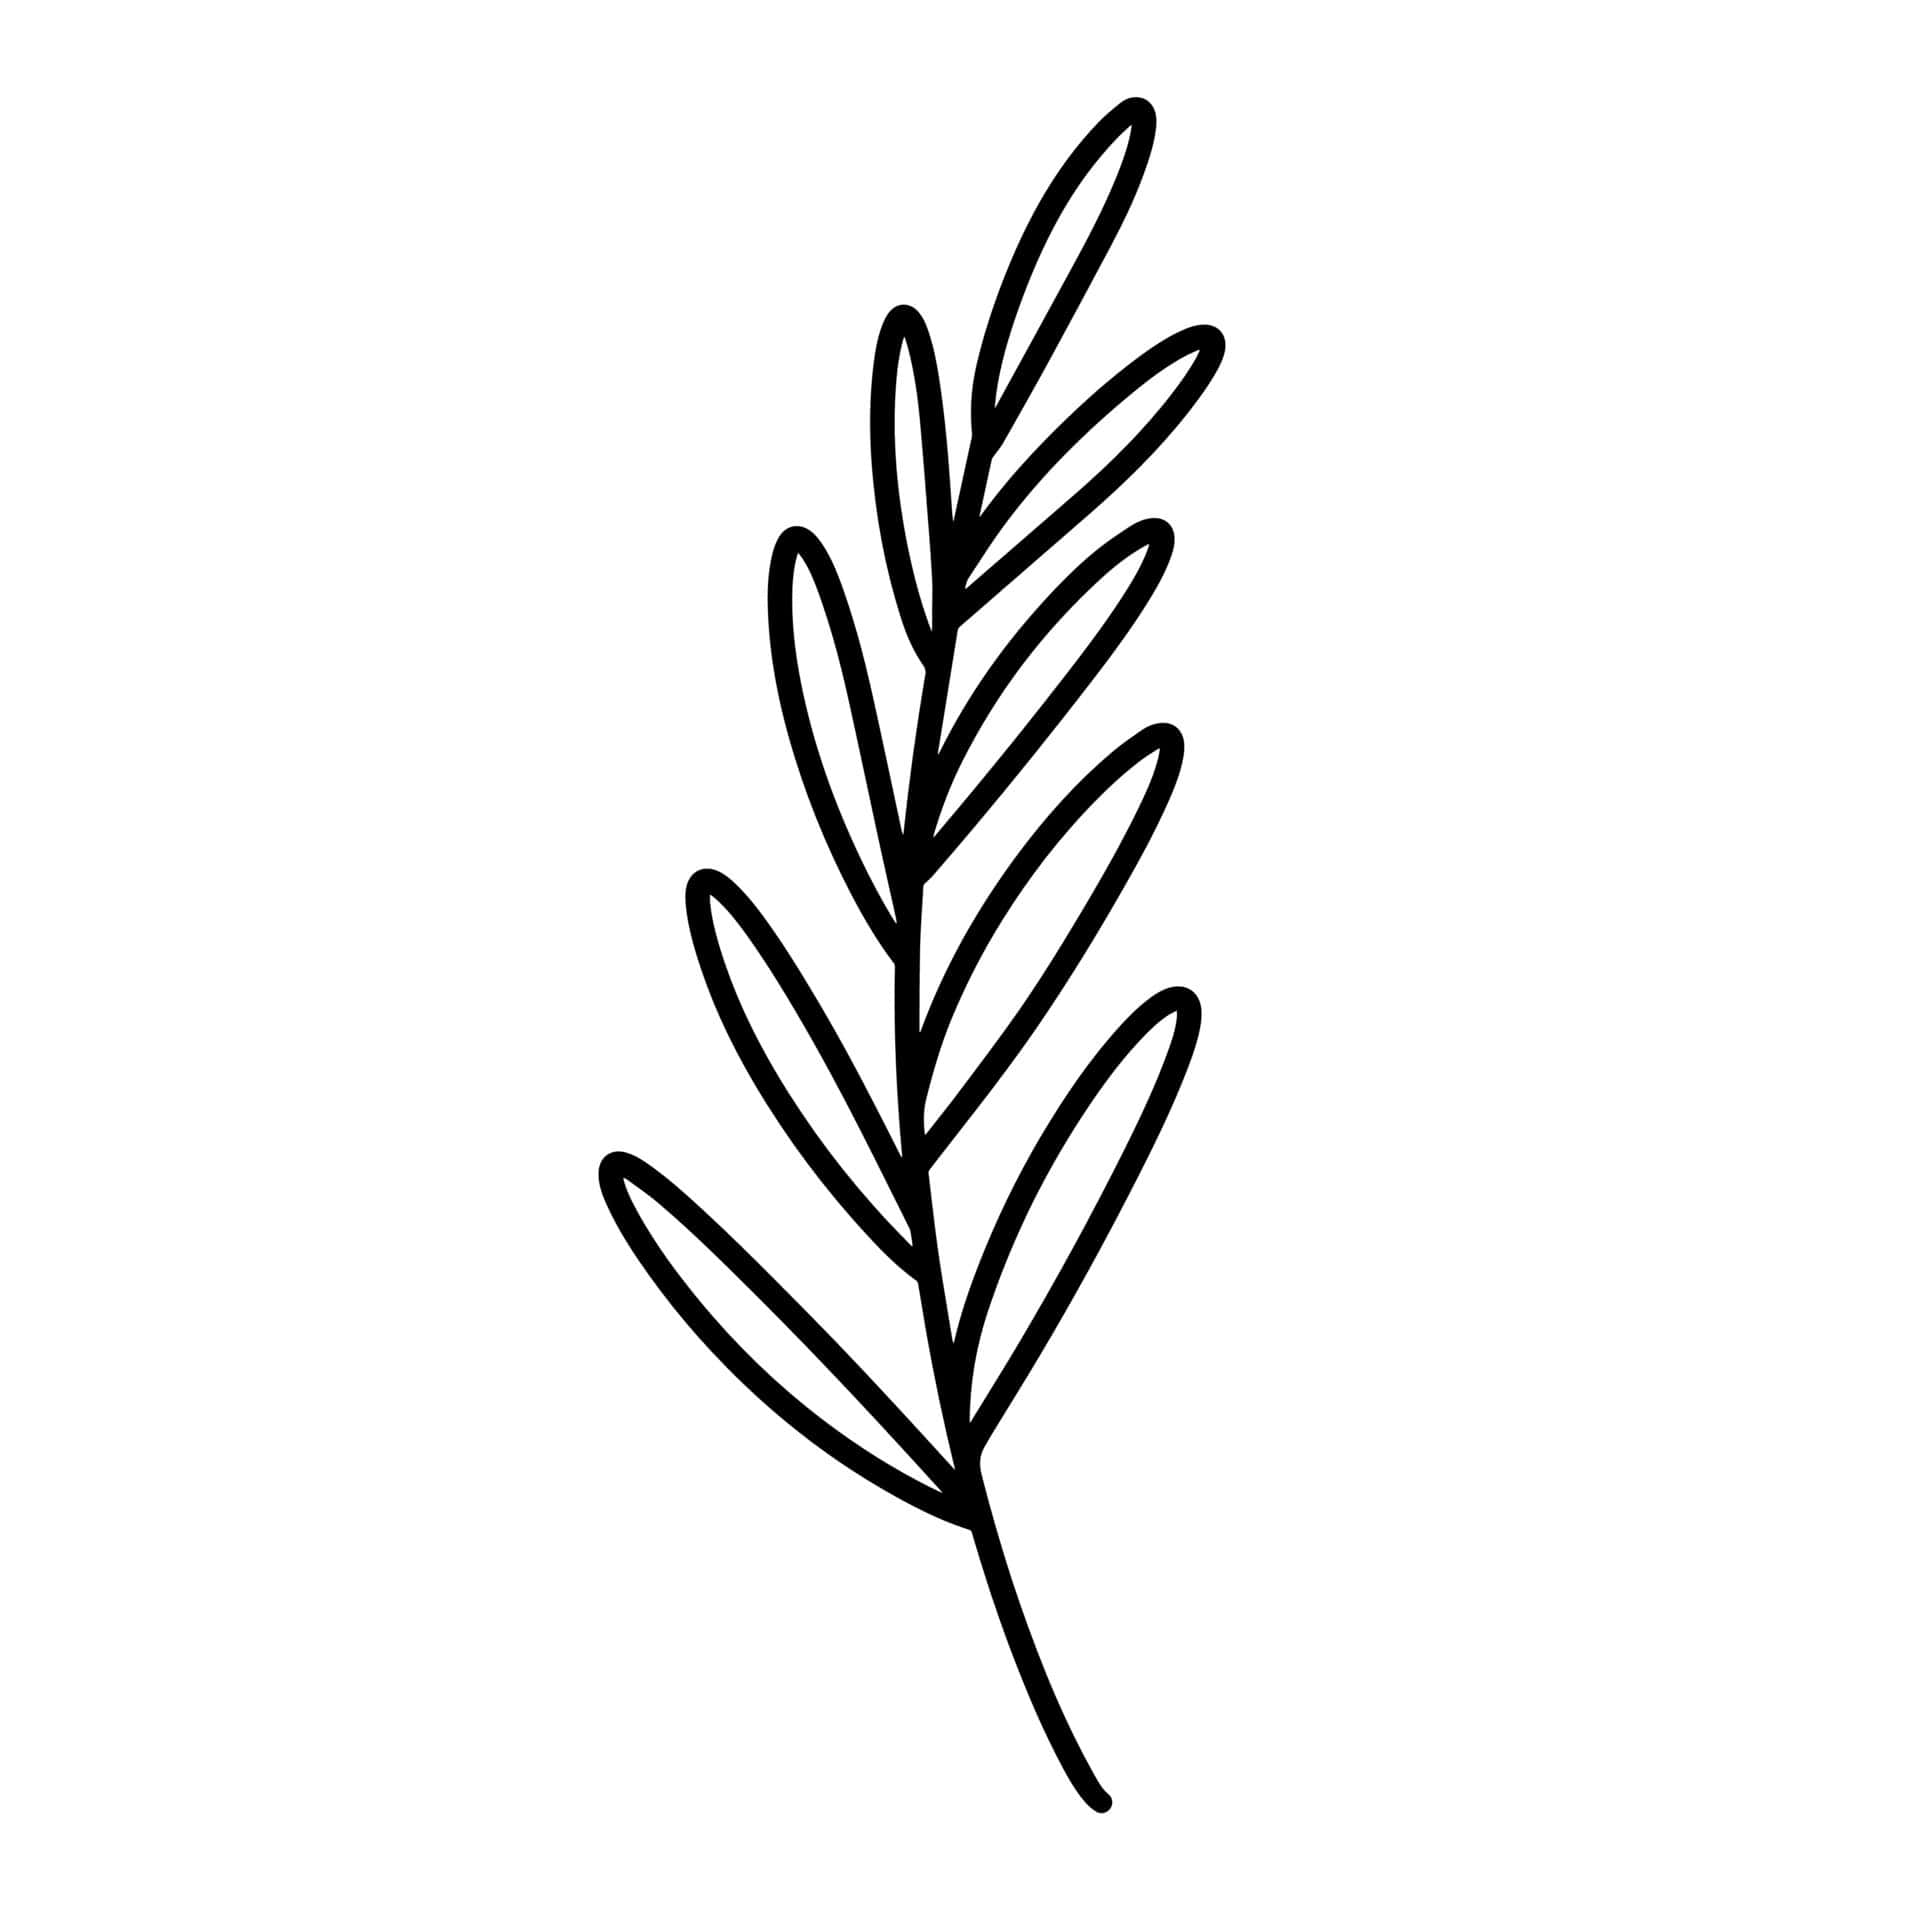 A Simple Line Drawing Of A Leaf